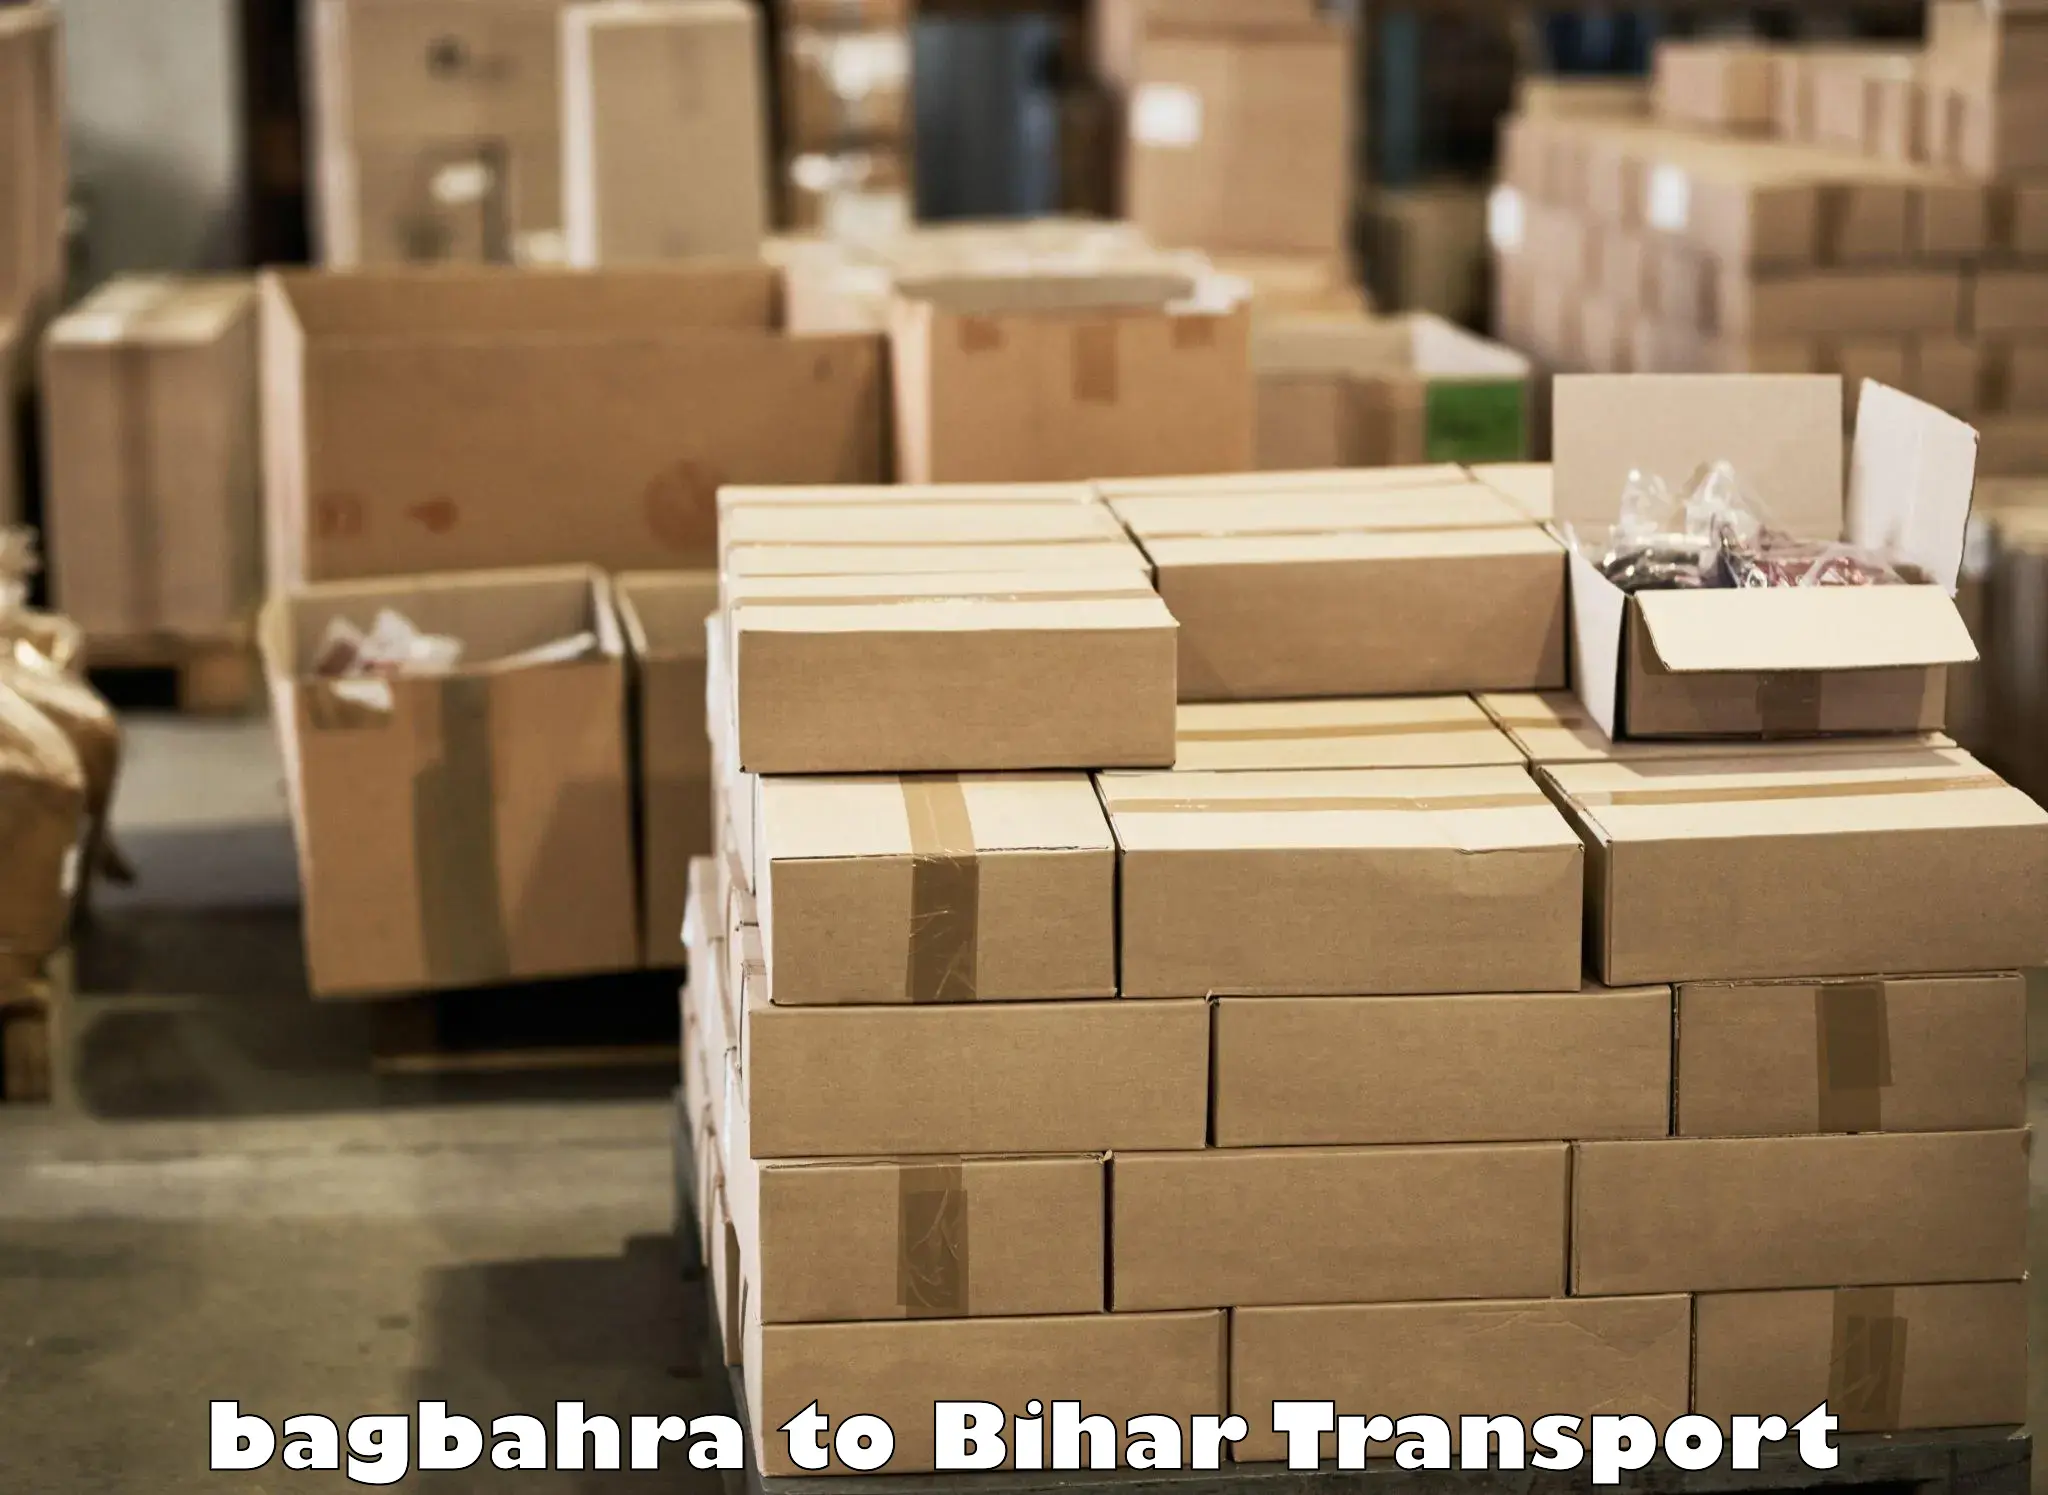 Air freight transport services bagbahra to Bihta